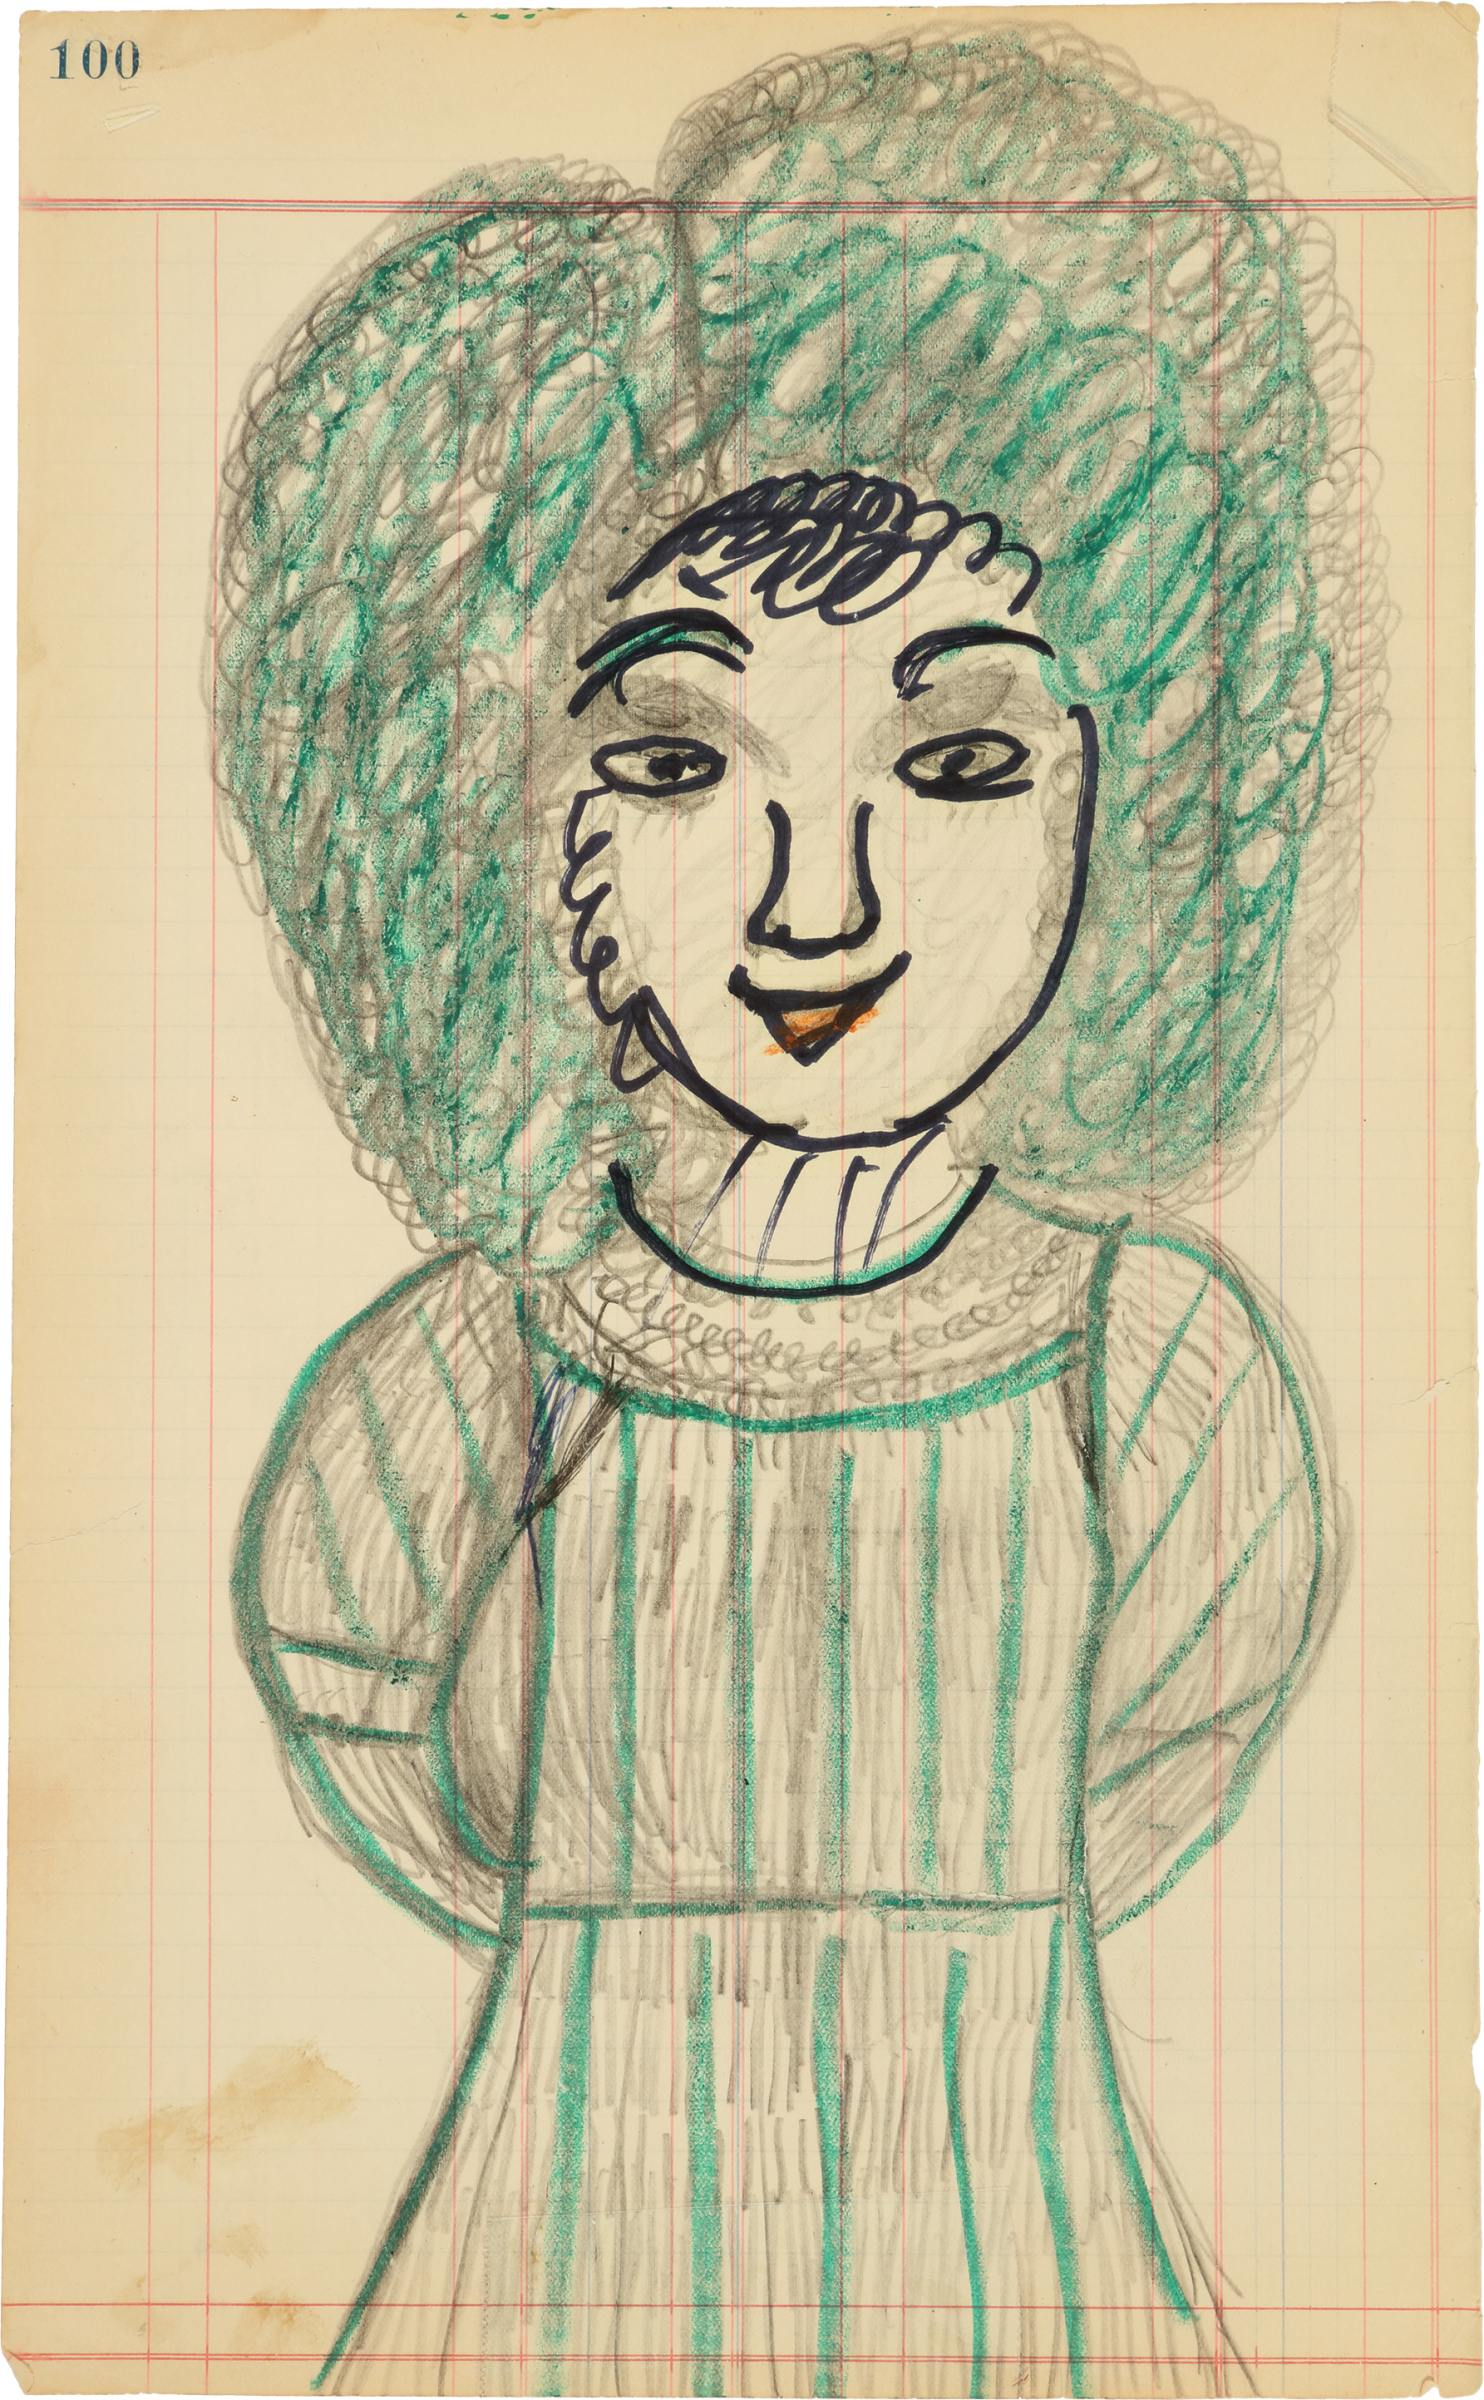 Drawing of a figure from the waist up, wearing a dress with green stripes and frilly collar, black marker outlining the facial features, and lead and green-colored curly hair.